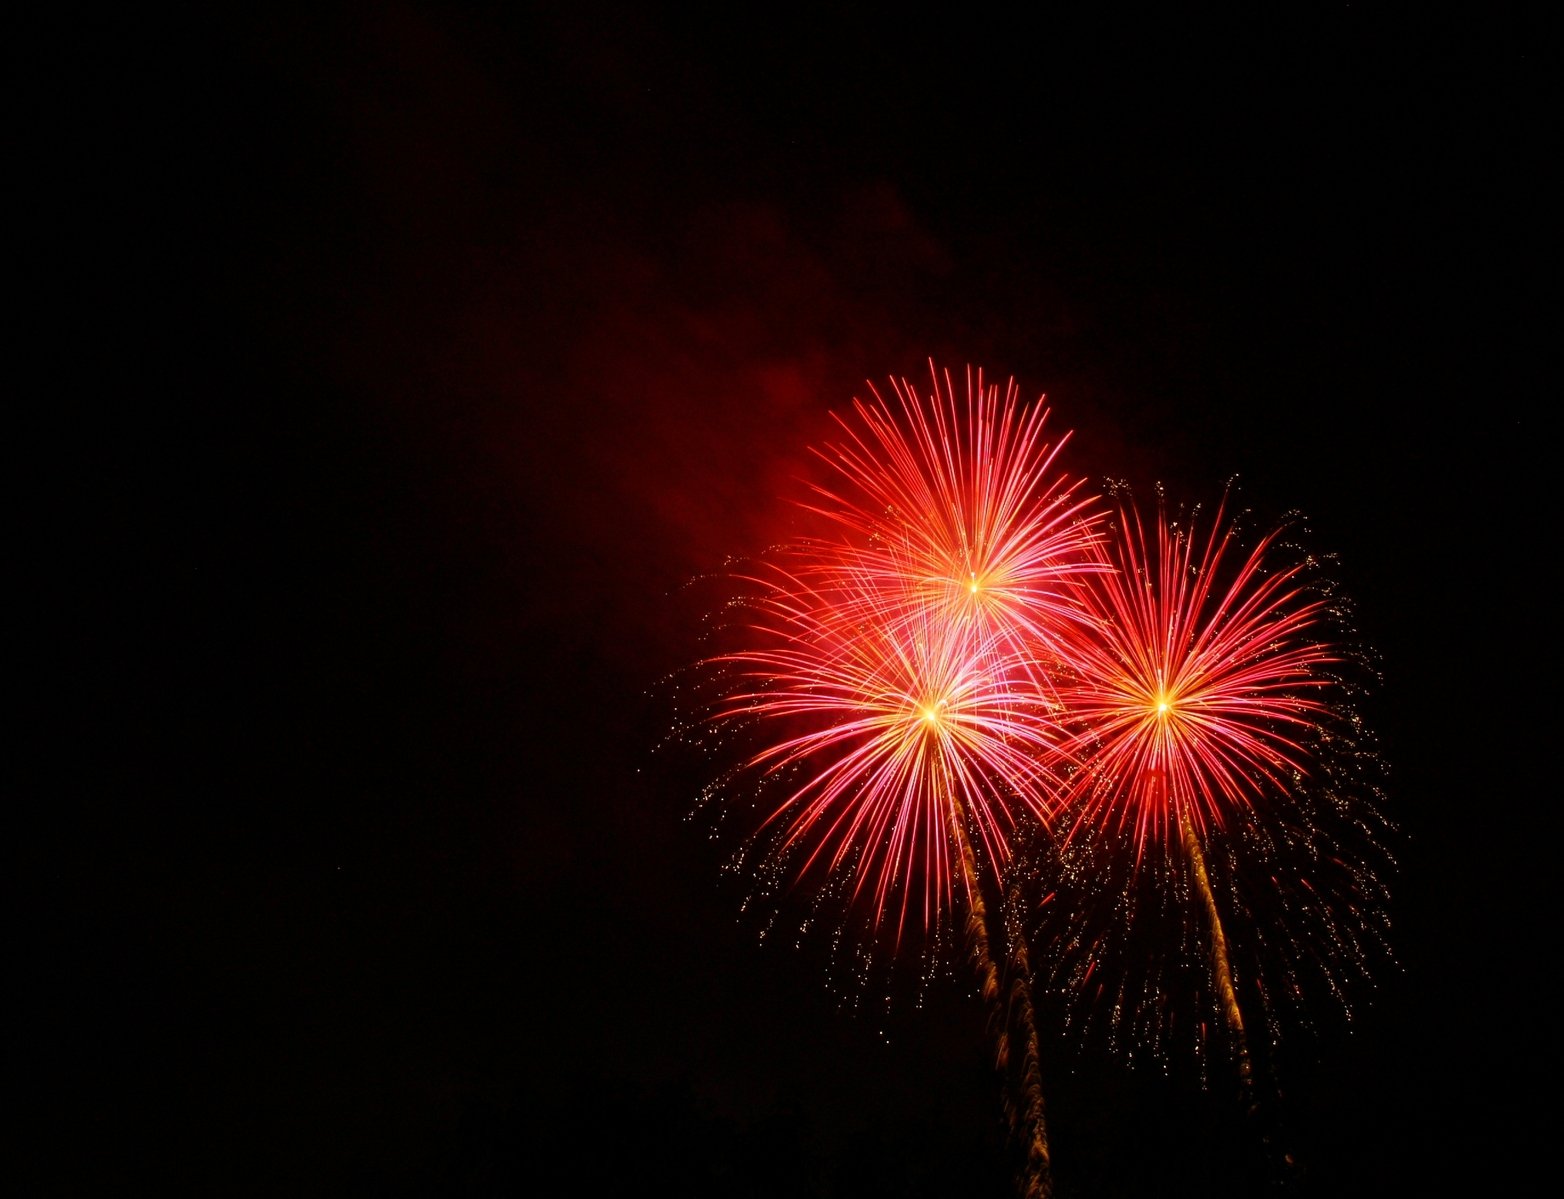 fireworks at night time with red and white lights